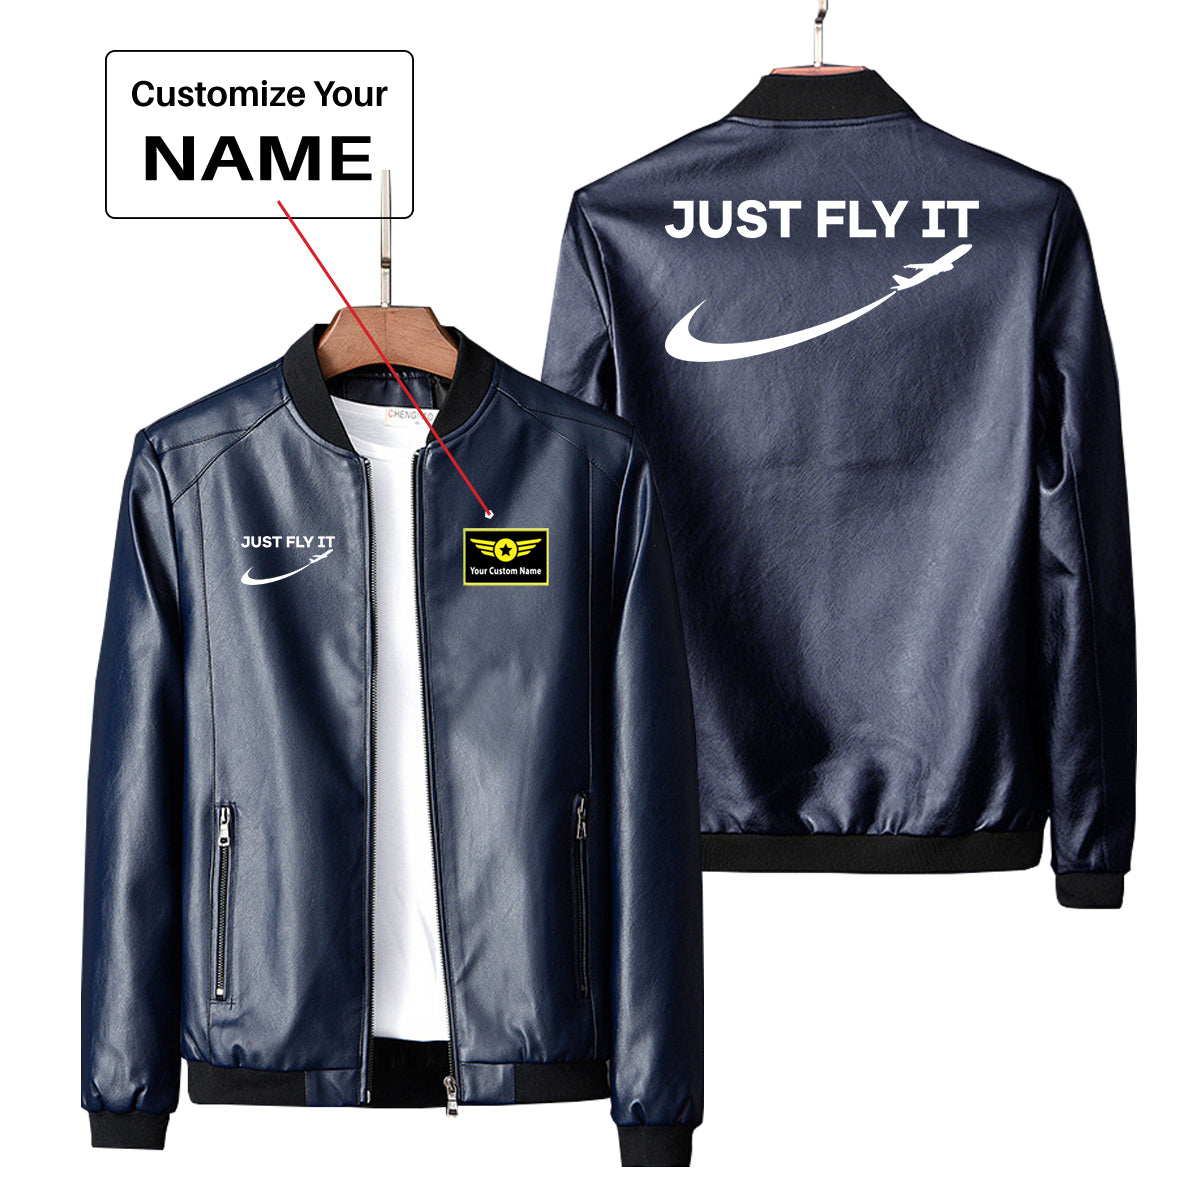 Just Fly It 2 Designed PU Leather Jackets